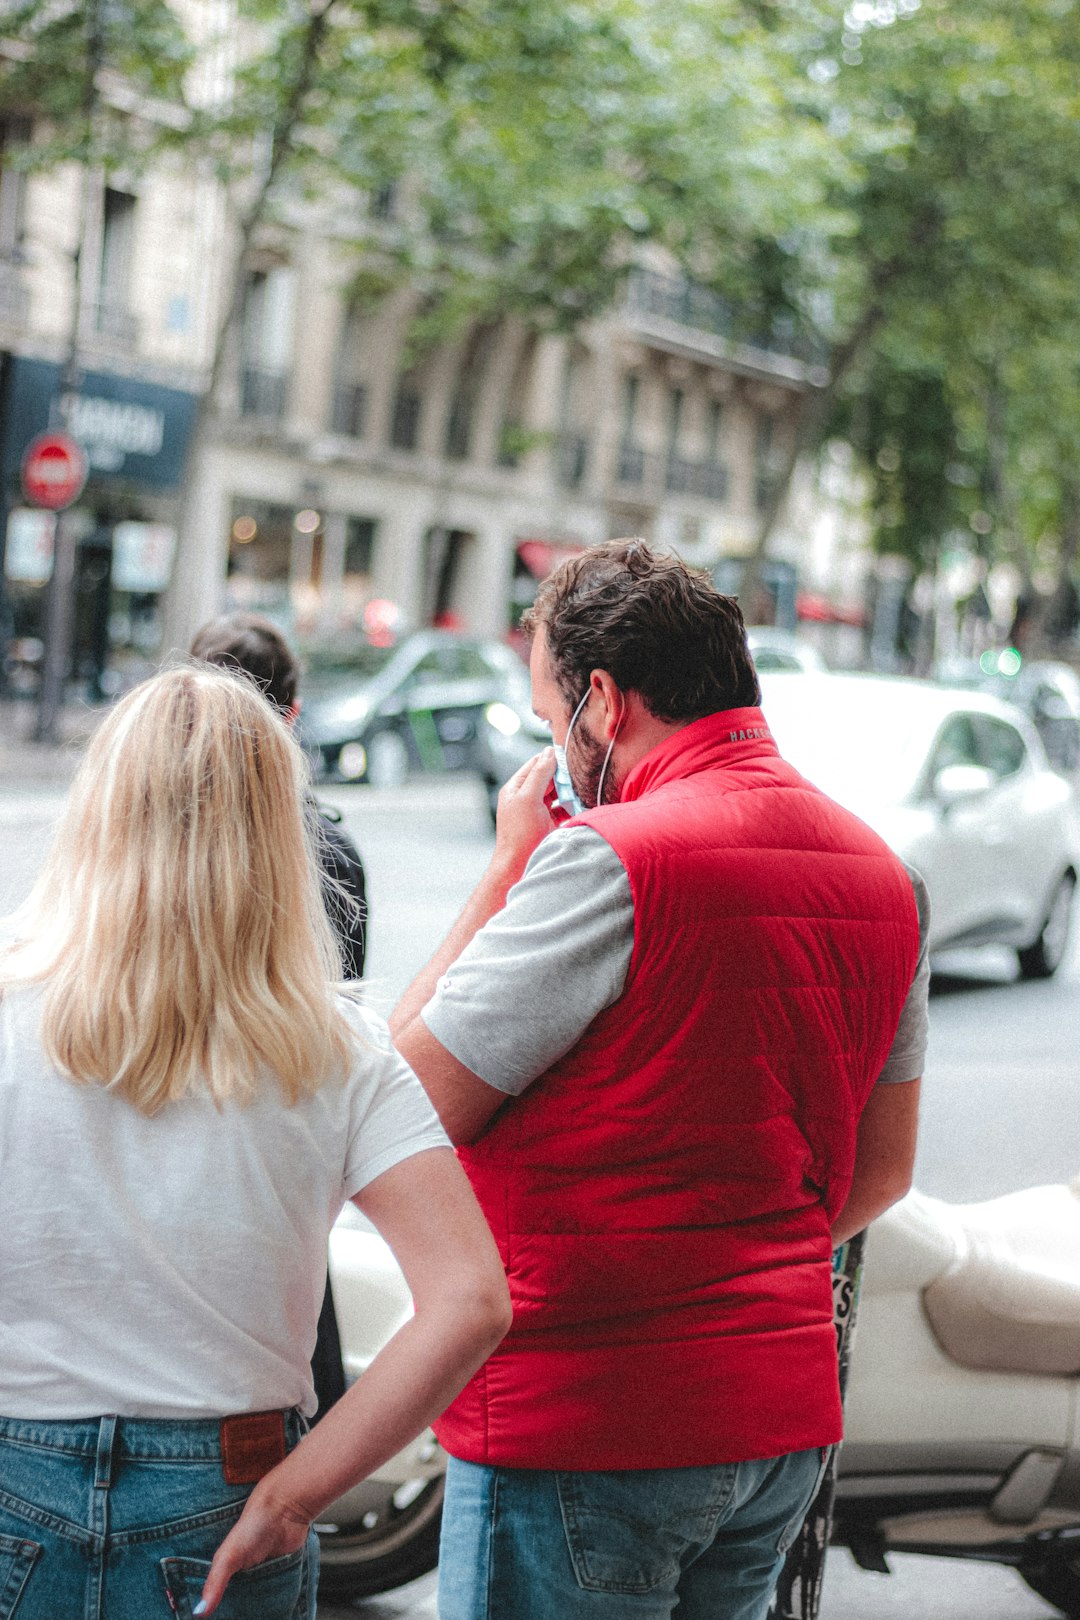 man in red shirt kissing woman in white shirt